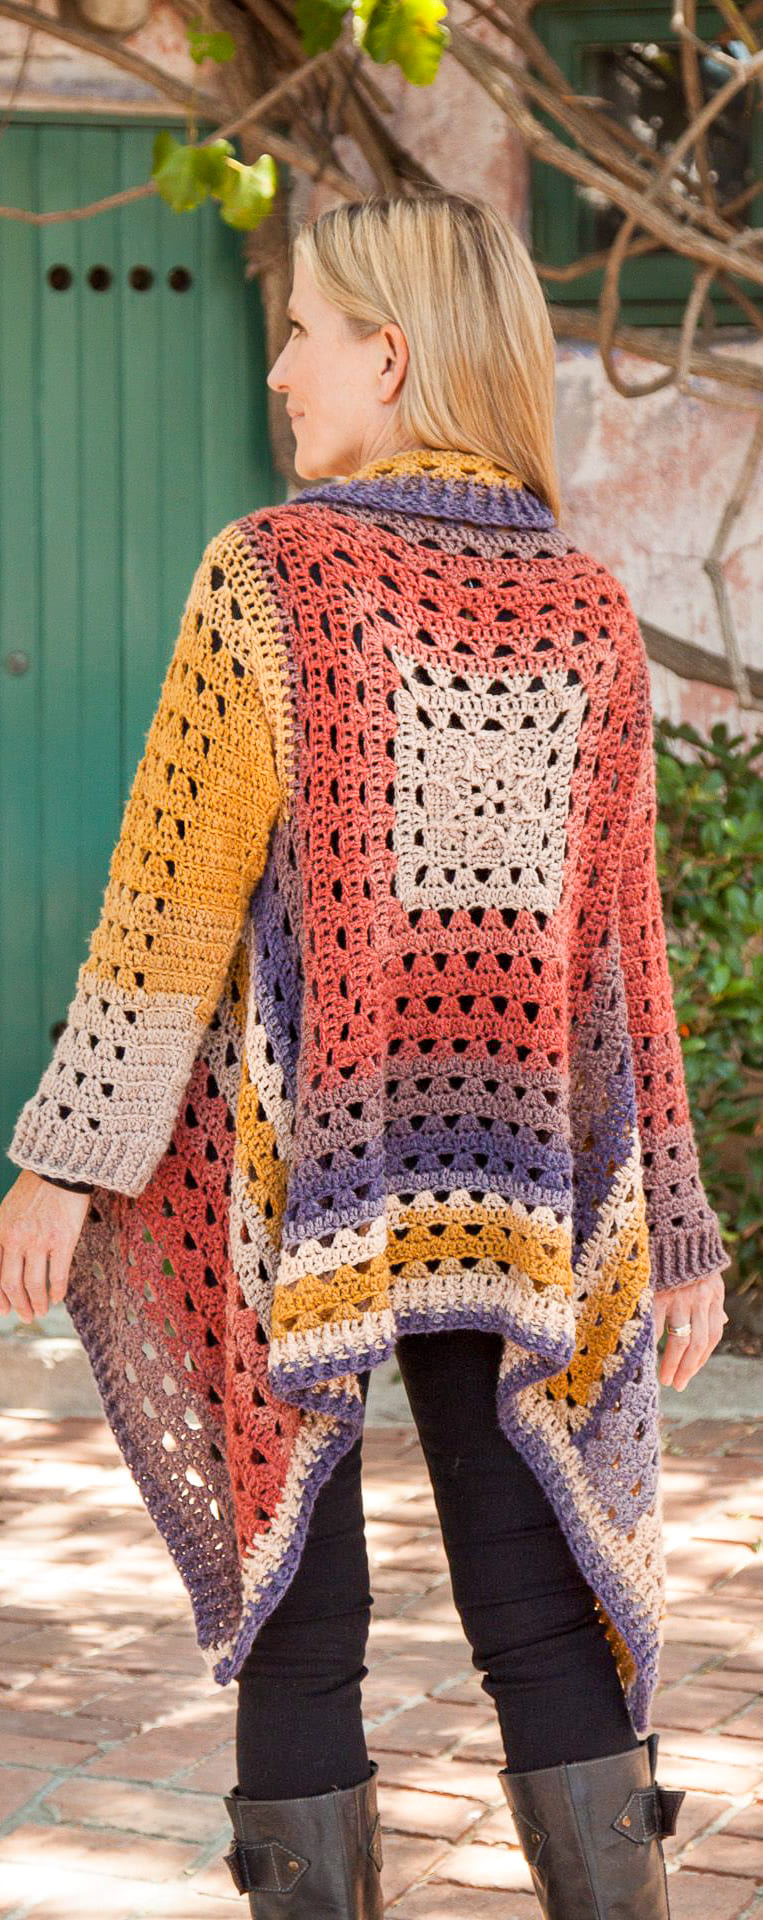 56+ New Design and Awesome Crochet Cardigan Pattern Ideas - Page 48 of